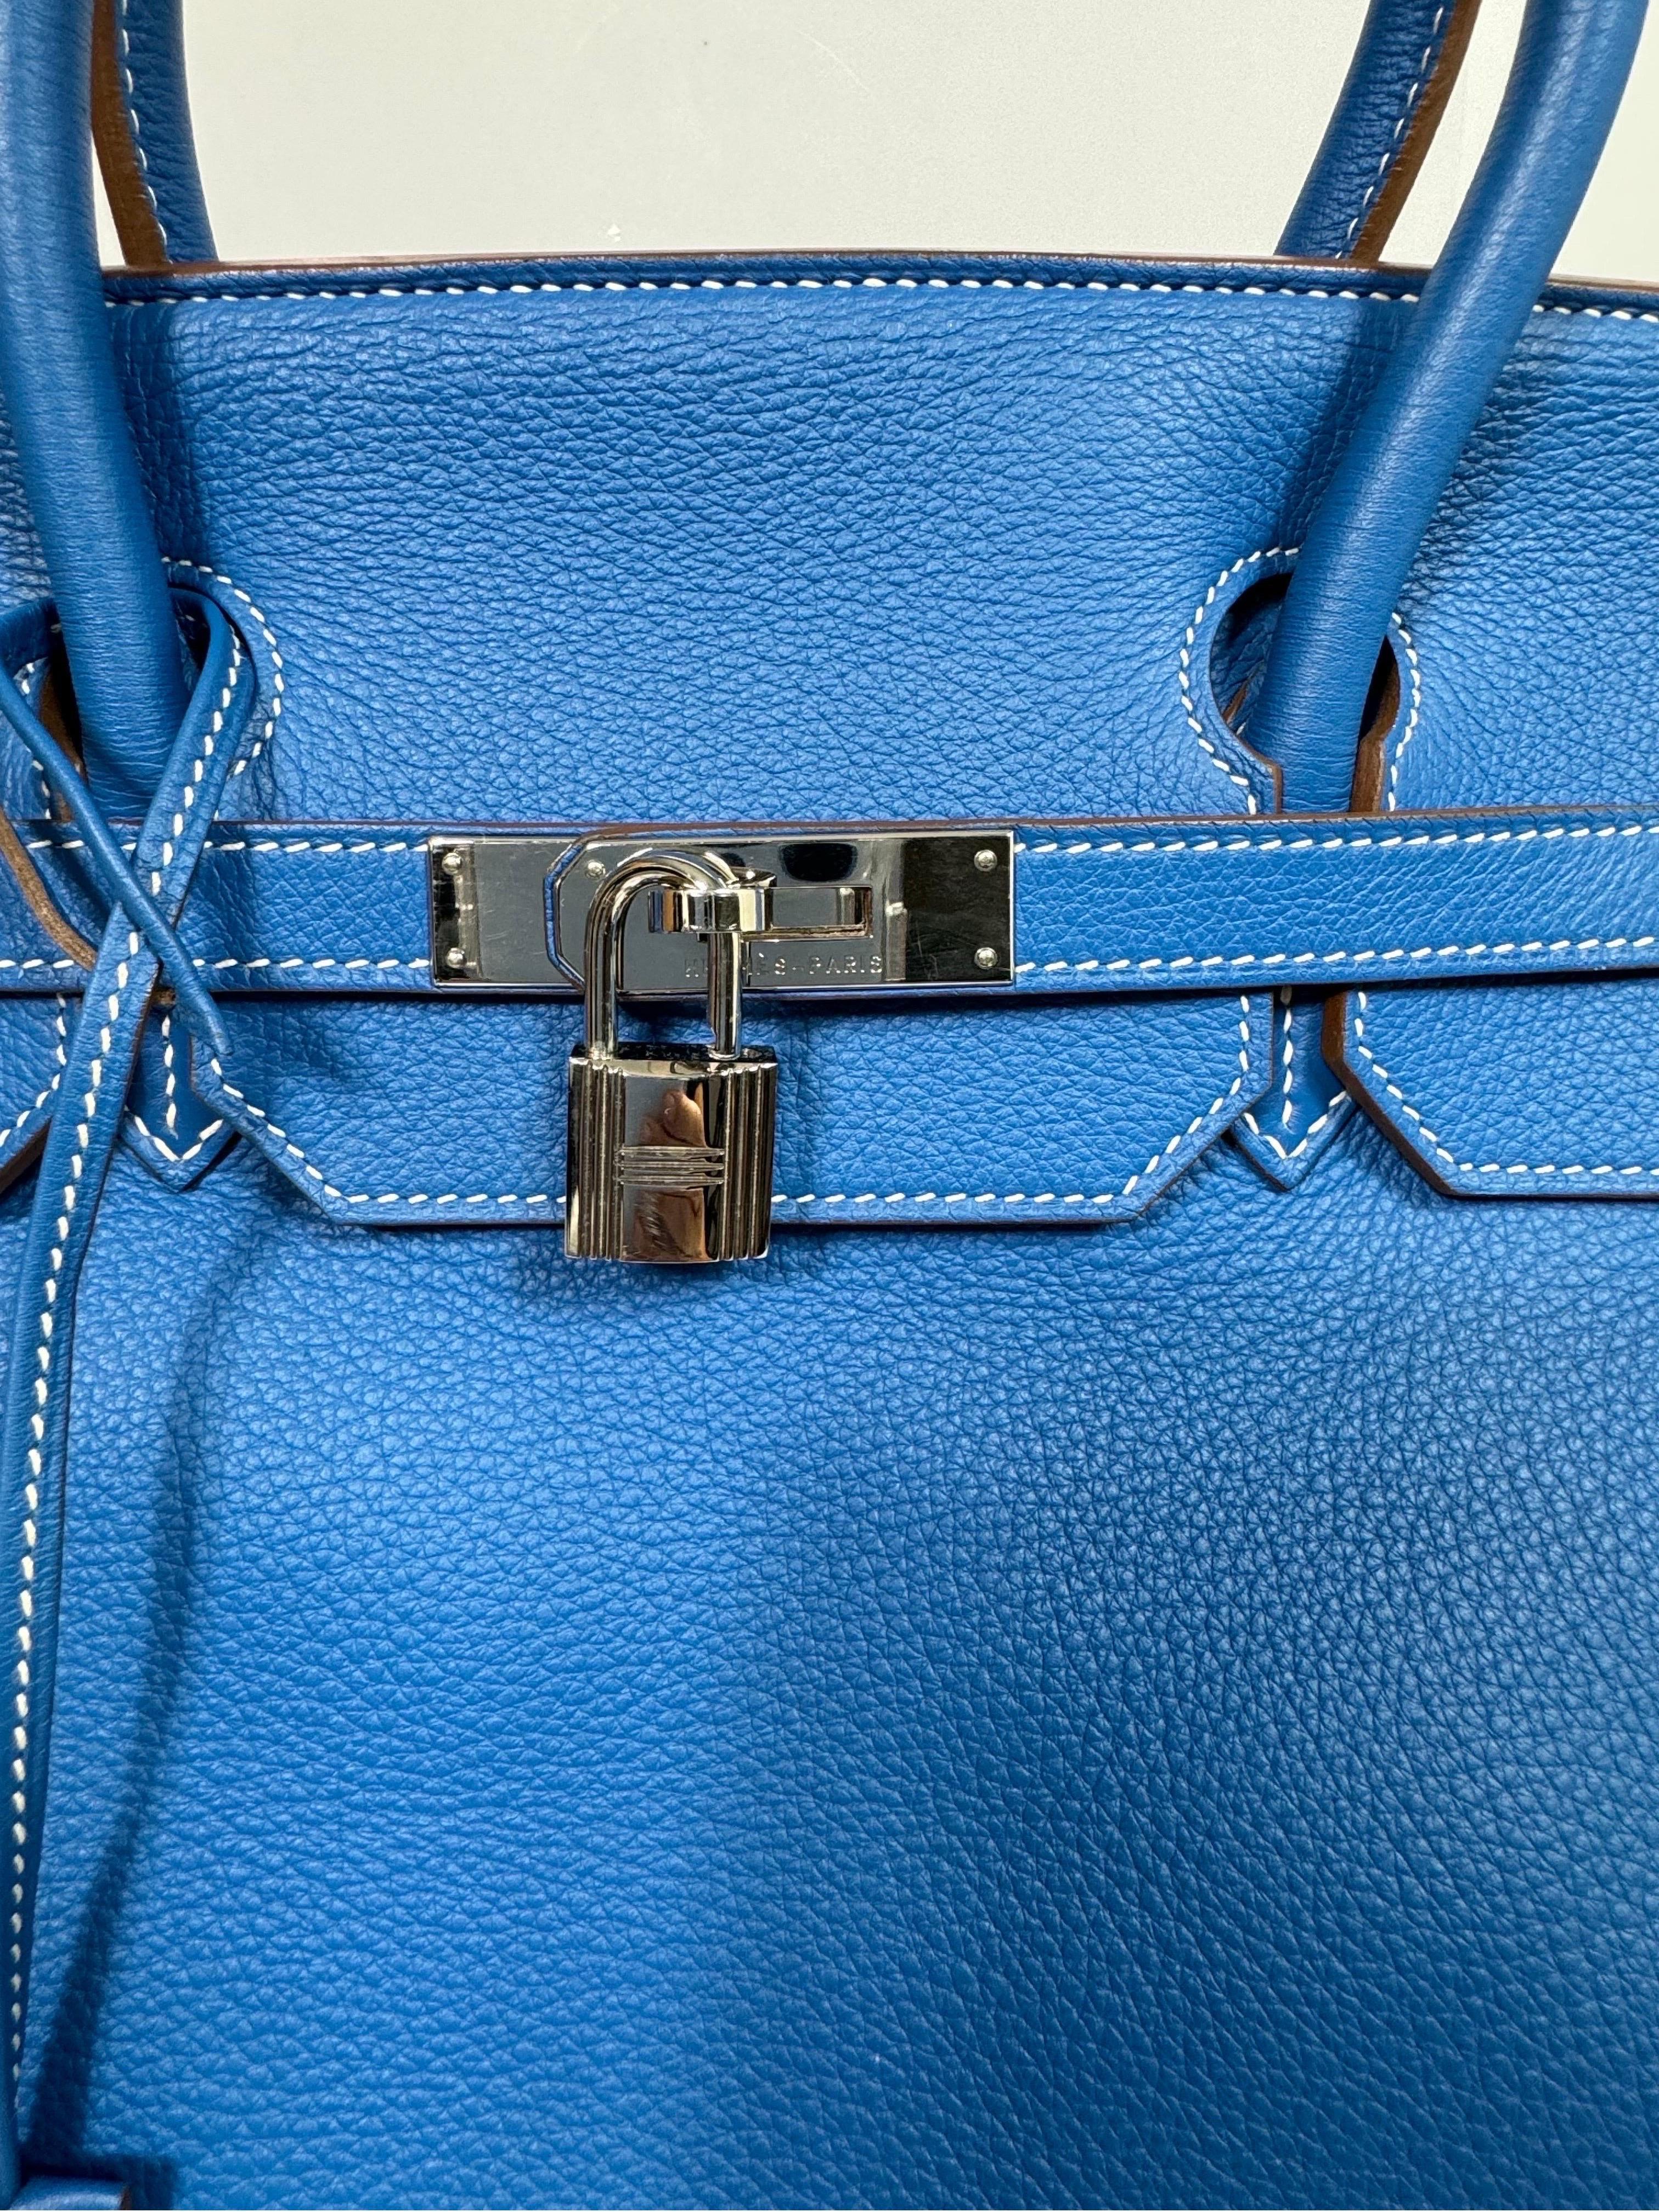 Hermes 40cm  Mykonos Blue and White Clemence Limited edition Birkin-SHW -2011 For Sale 12